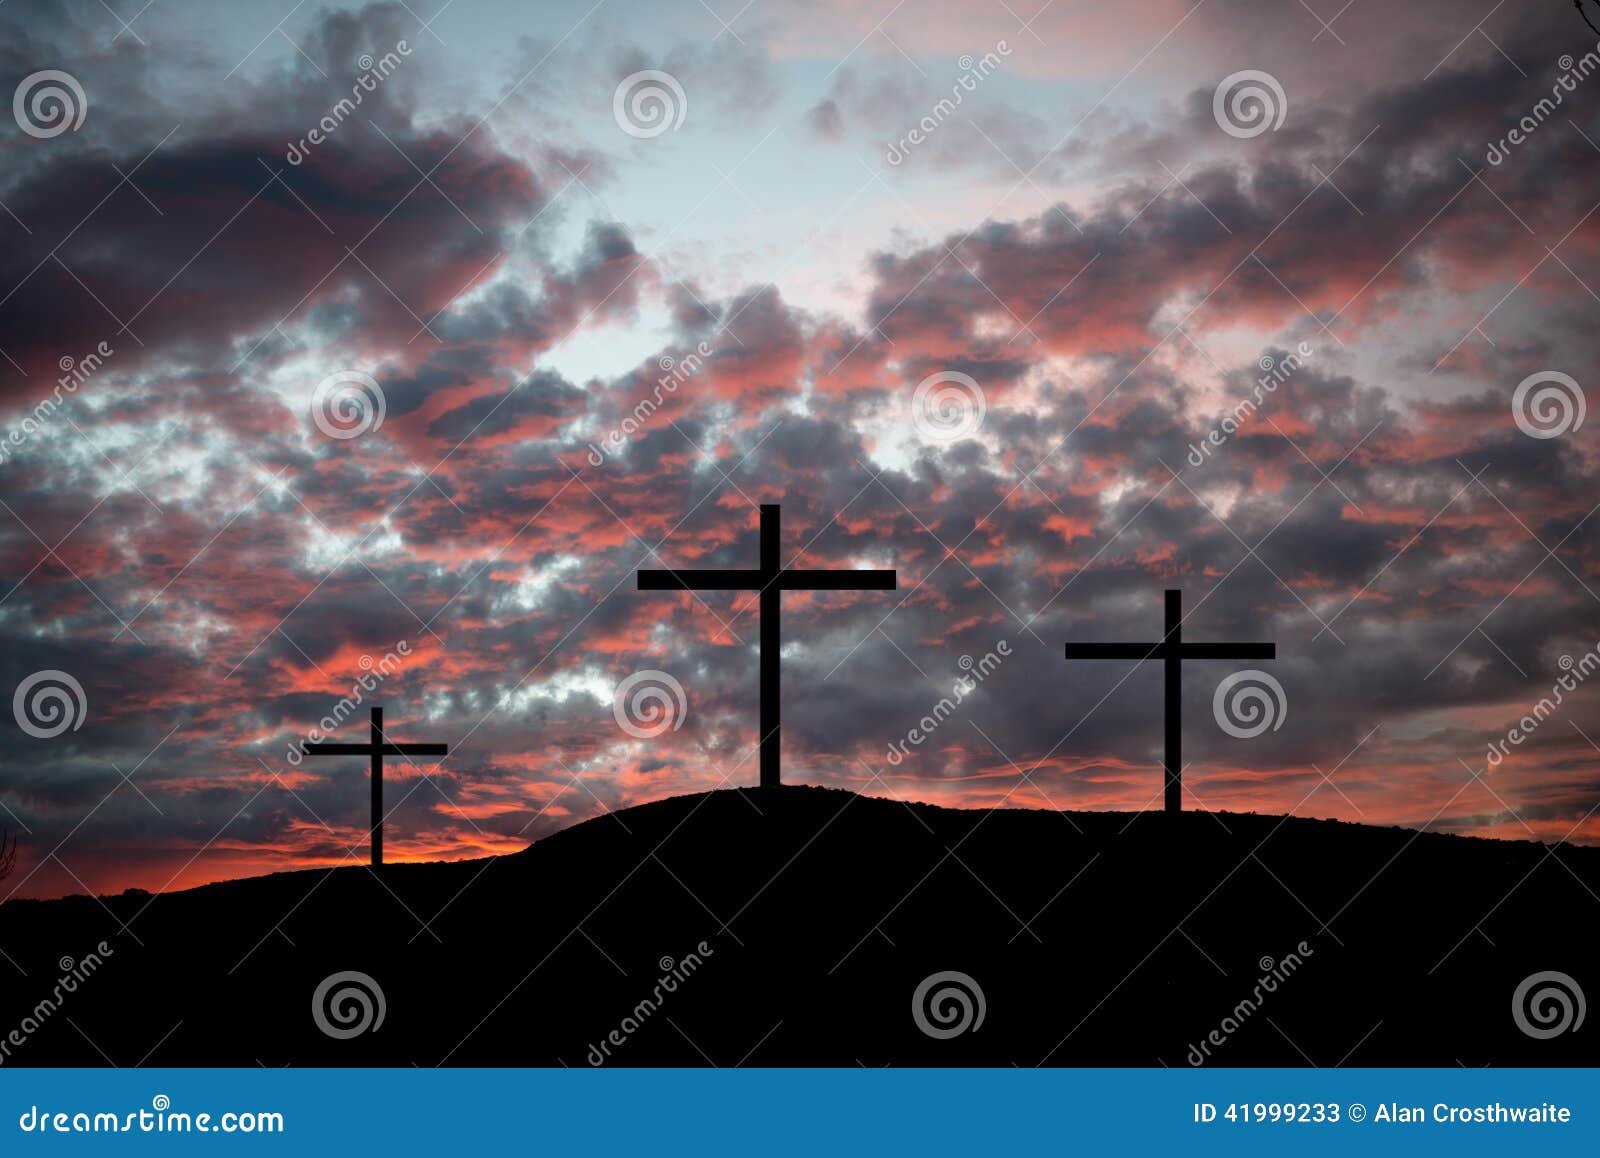 crosses on a hilltop